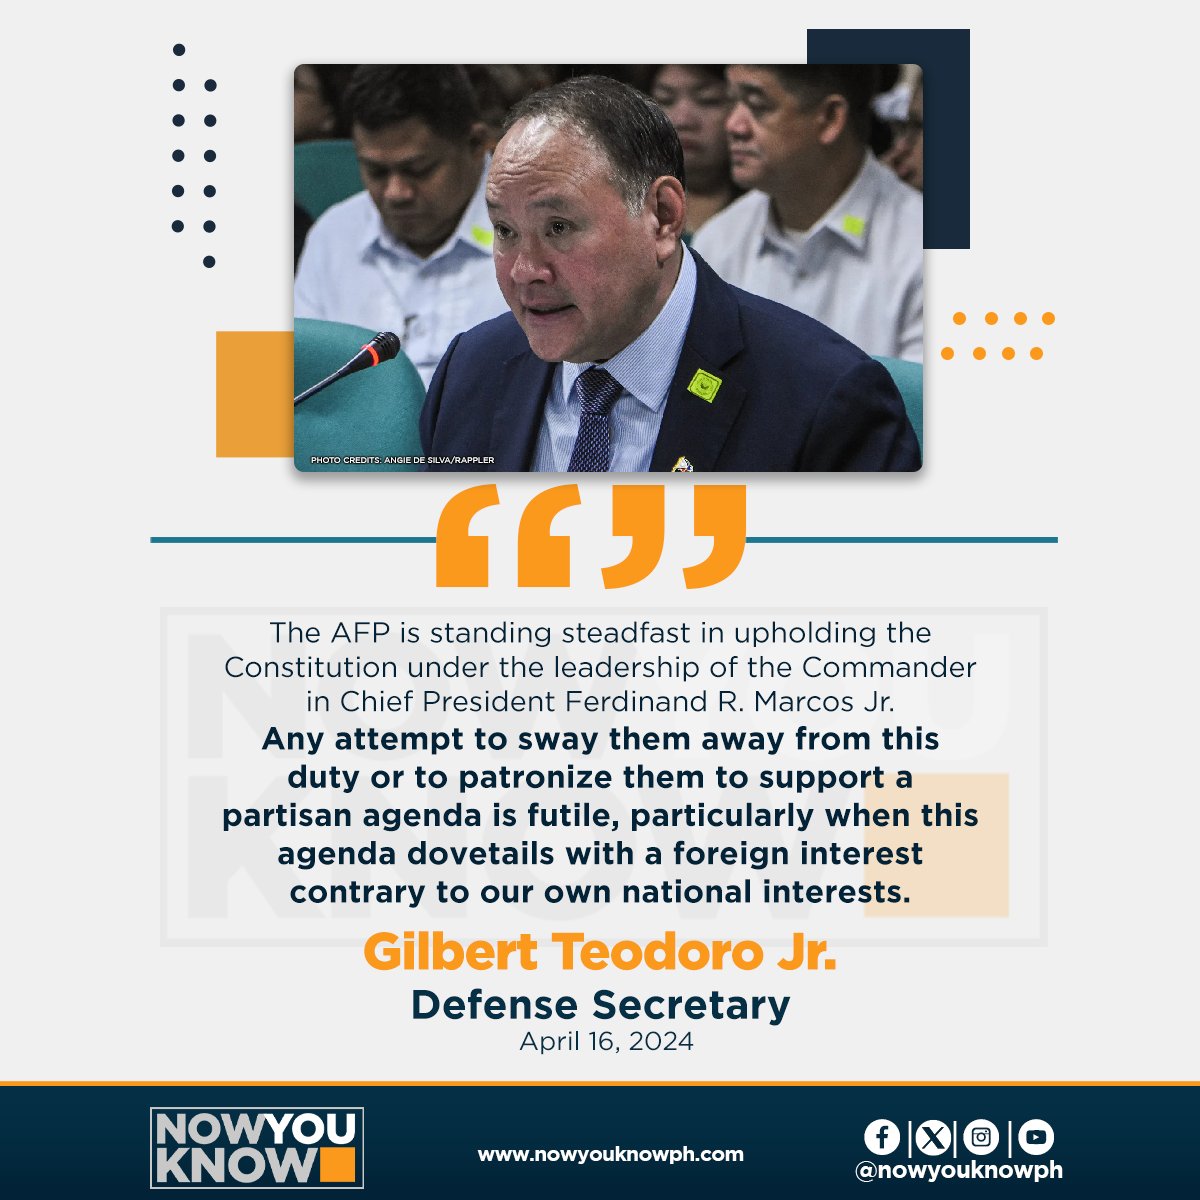 Defense Secretary Gilberto Teodoro Jr. on Tuesday called “futile” any attempts to make the Armed Forces of the Philippines (AFP) turn against the Constitution and the current administration. READ: bitly.ws/3i7eQ 📰 Inquirer.net